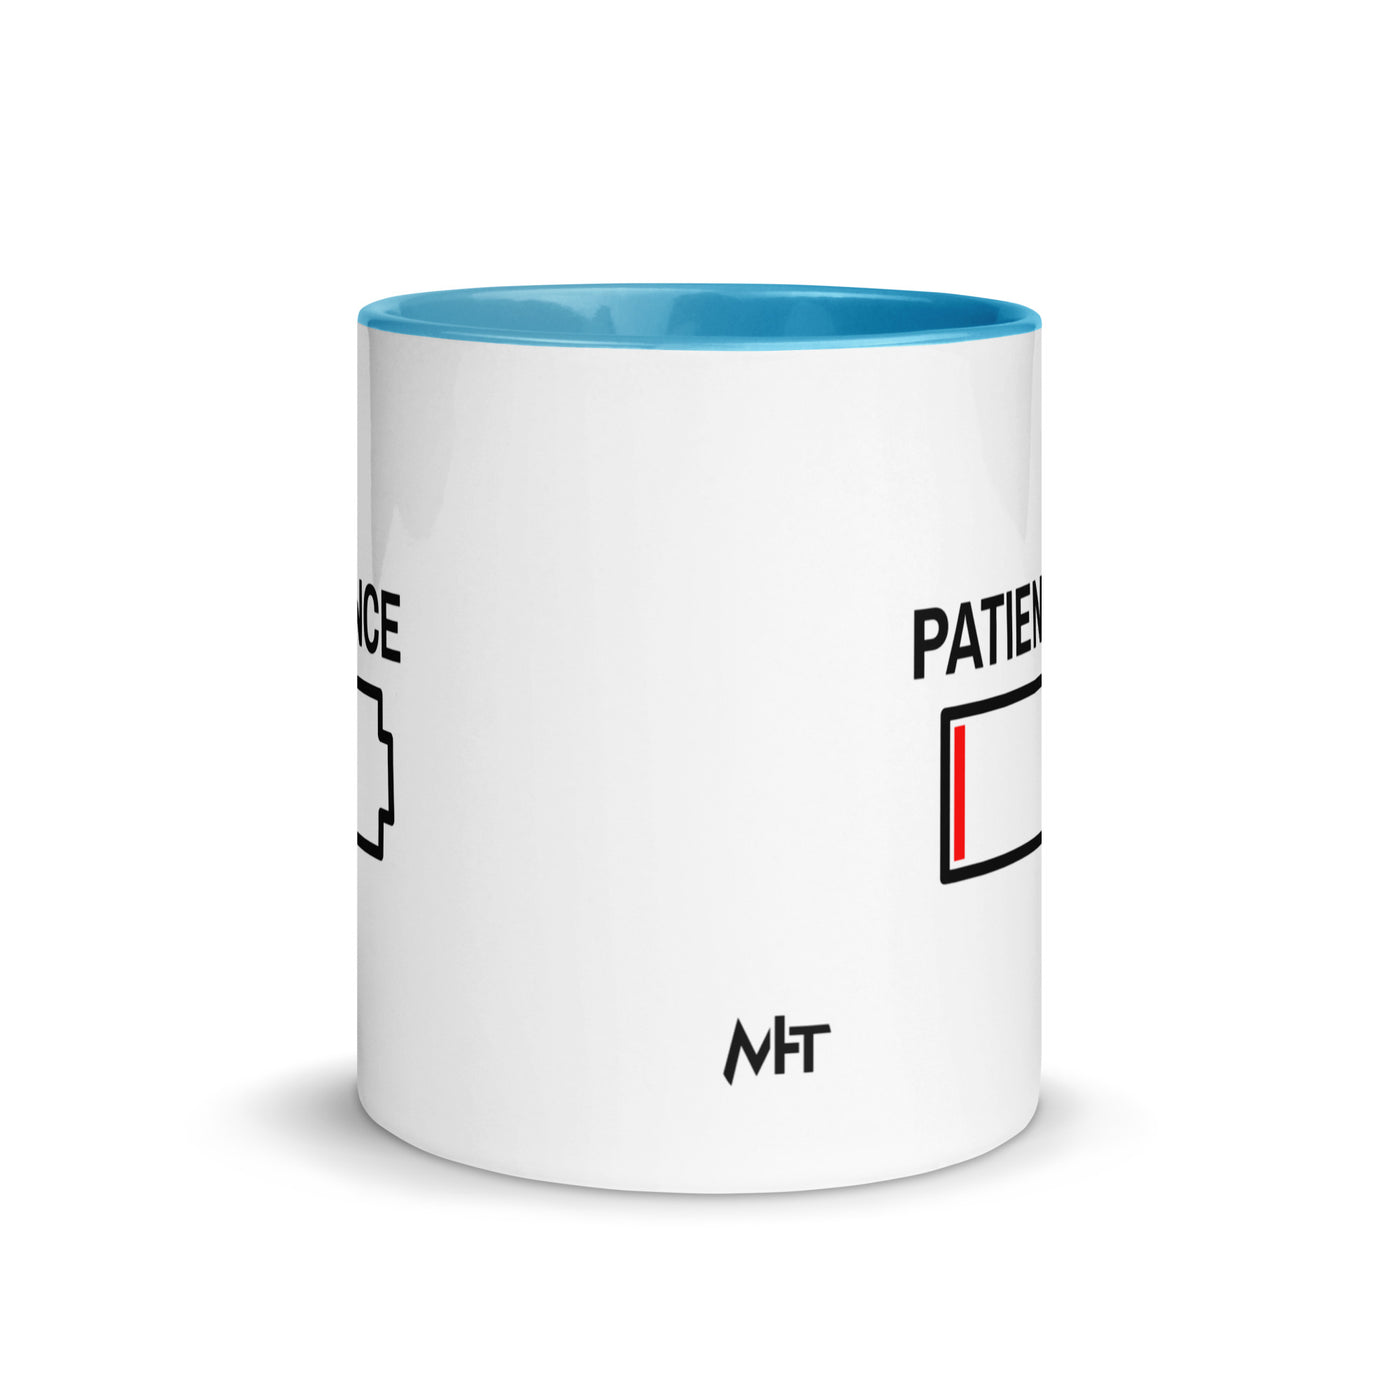 Patience - Mug with Color Inside